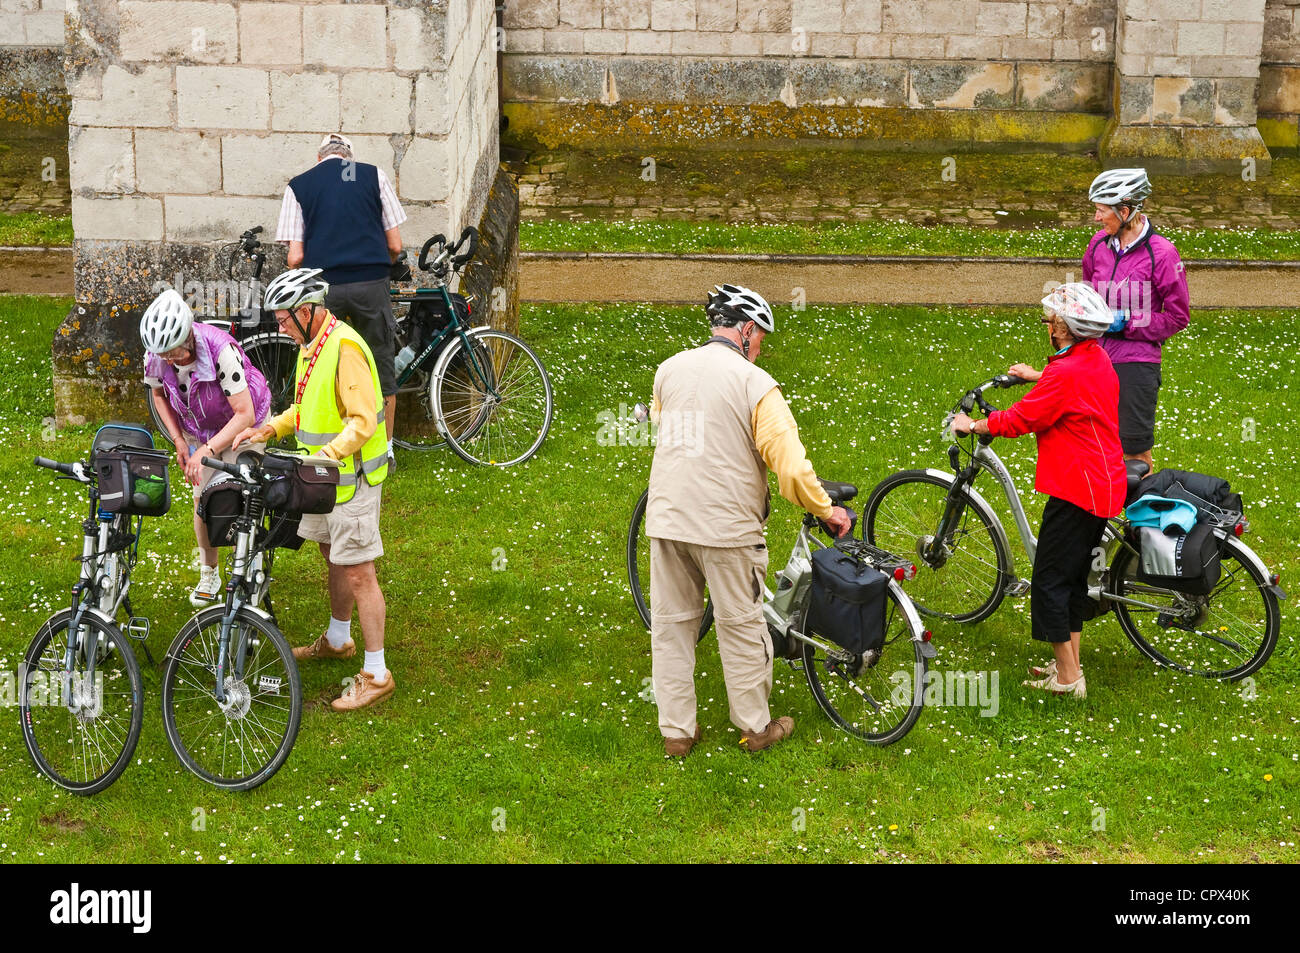 Six older cyclists on holiday parking their bikes on grass - France. Stock Photo